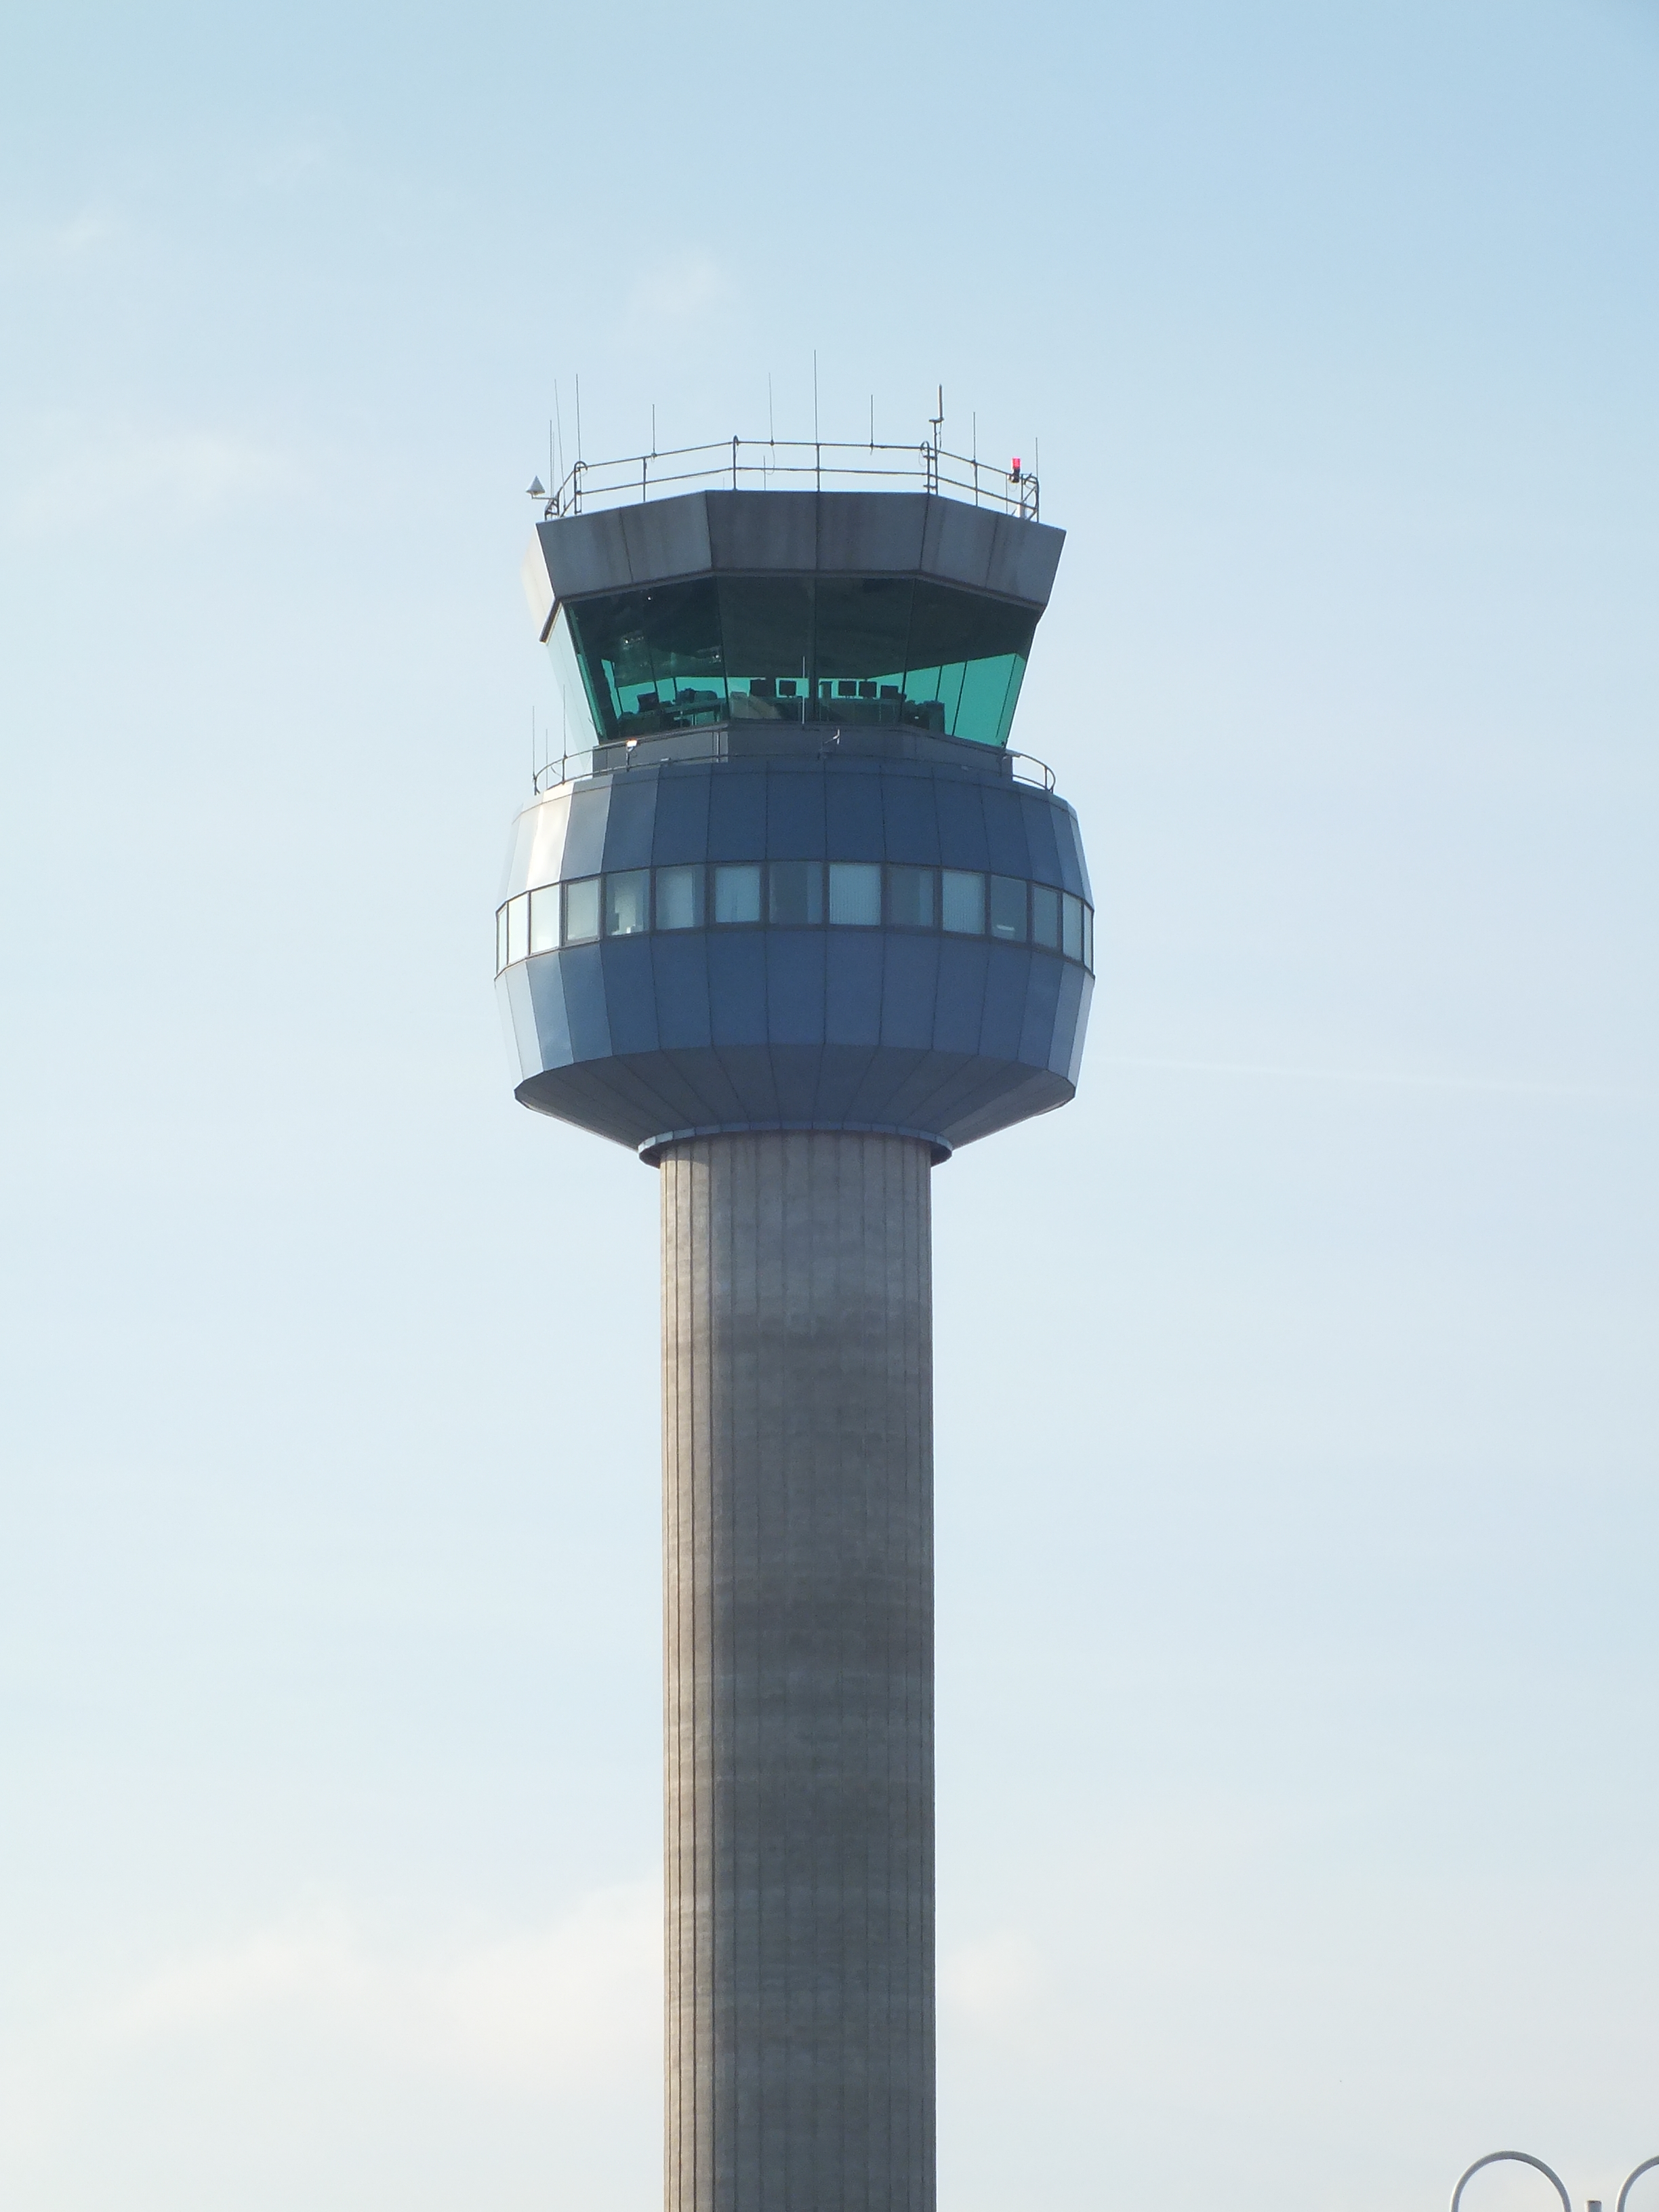 Control tower, Control, Flight, Structure, Tower, HQ Photo